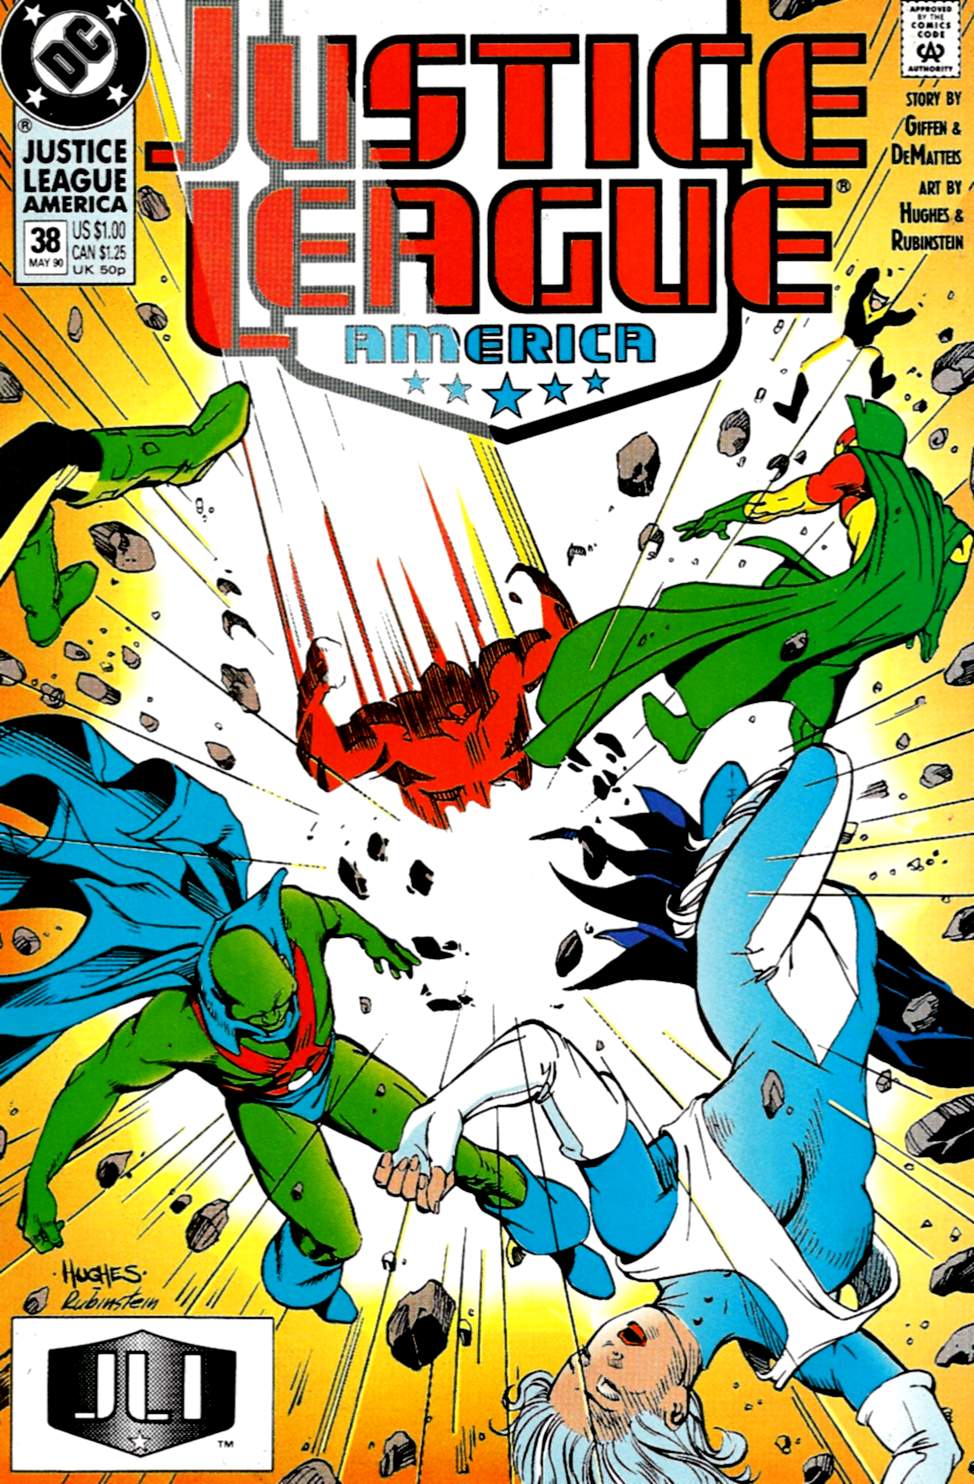 Read online Justice League America comic -  Issue #38 - 1